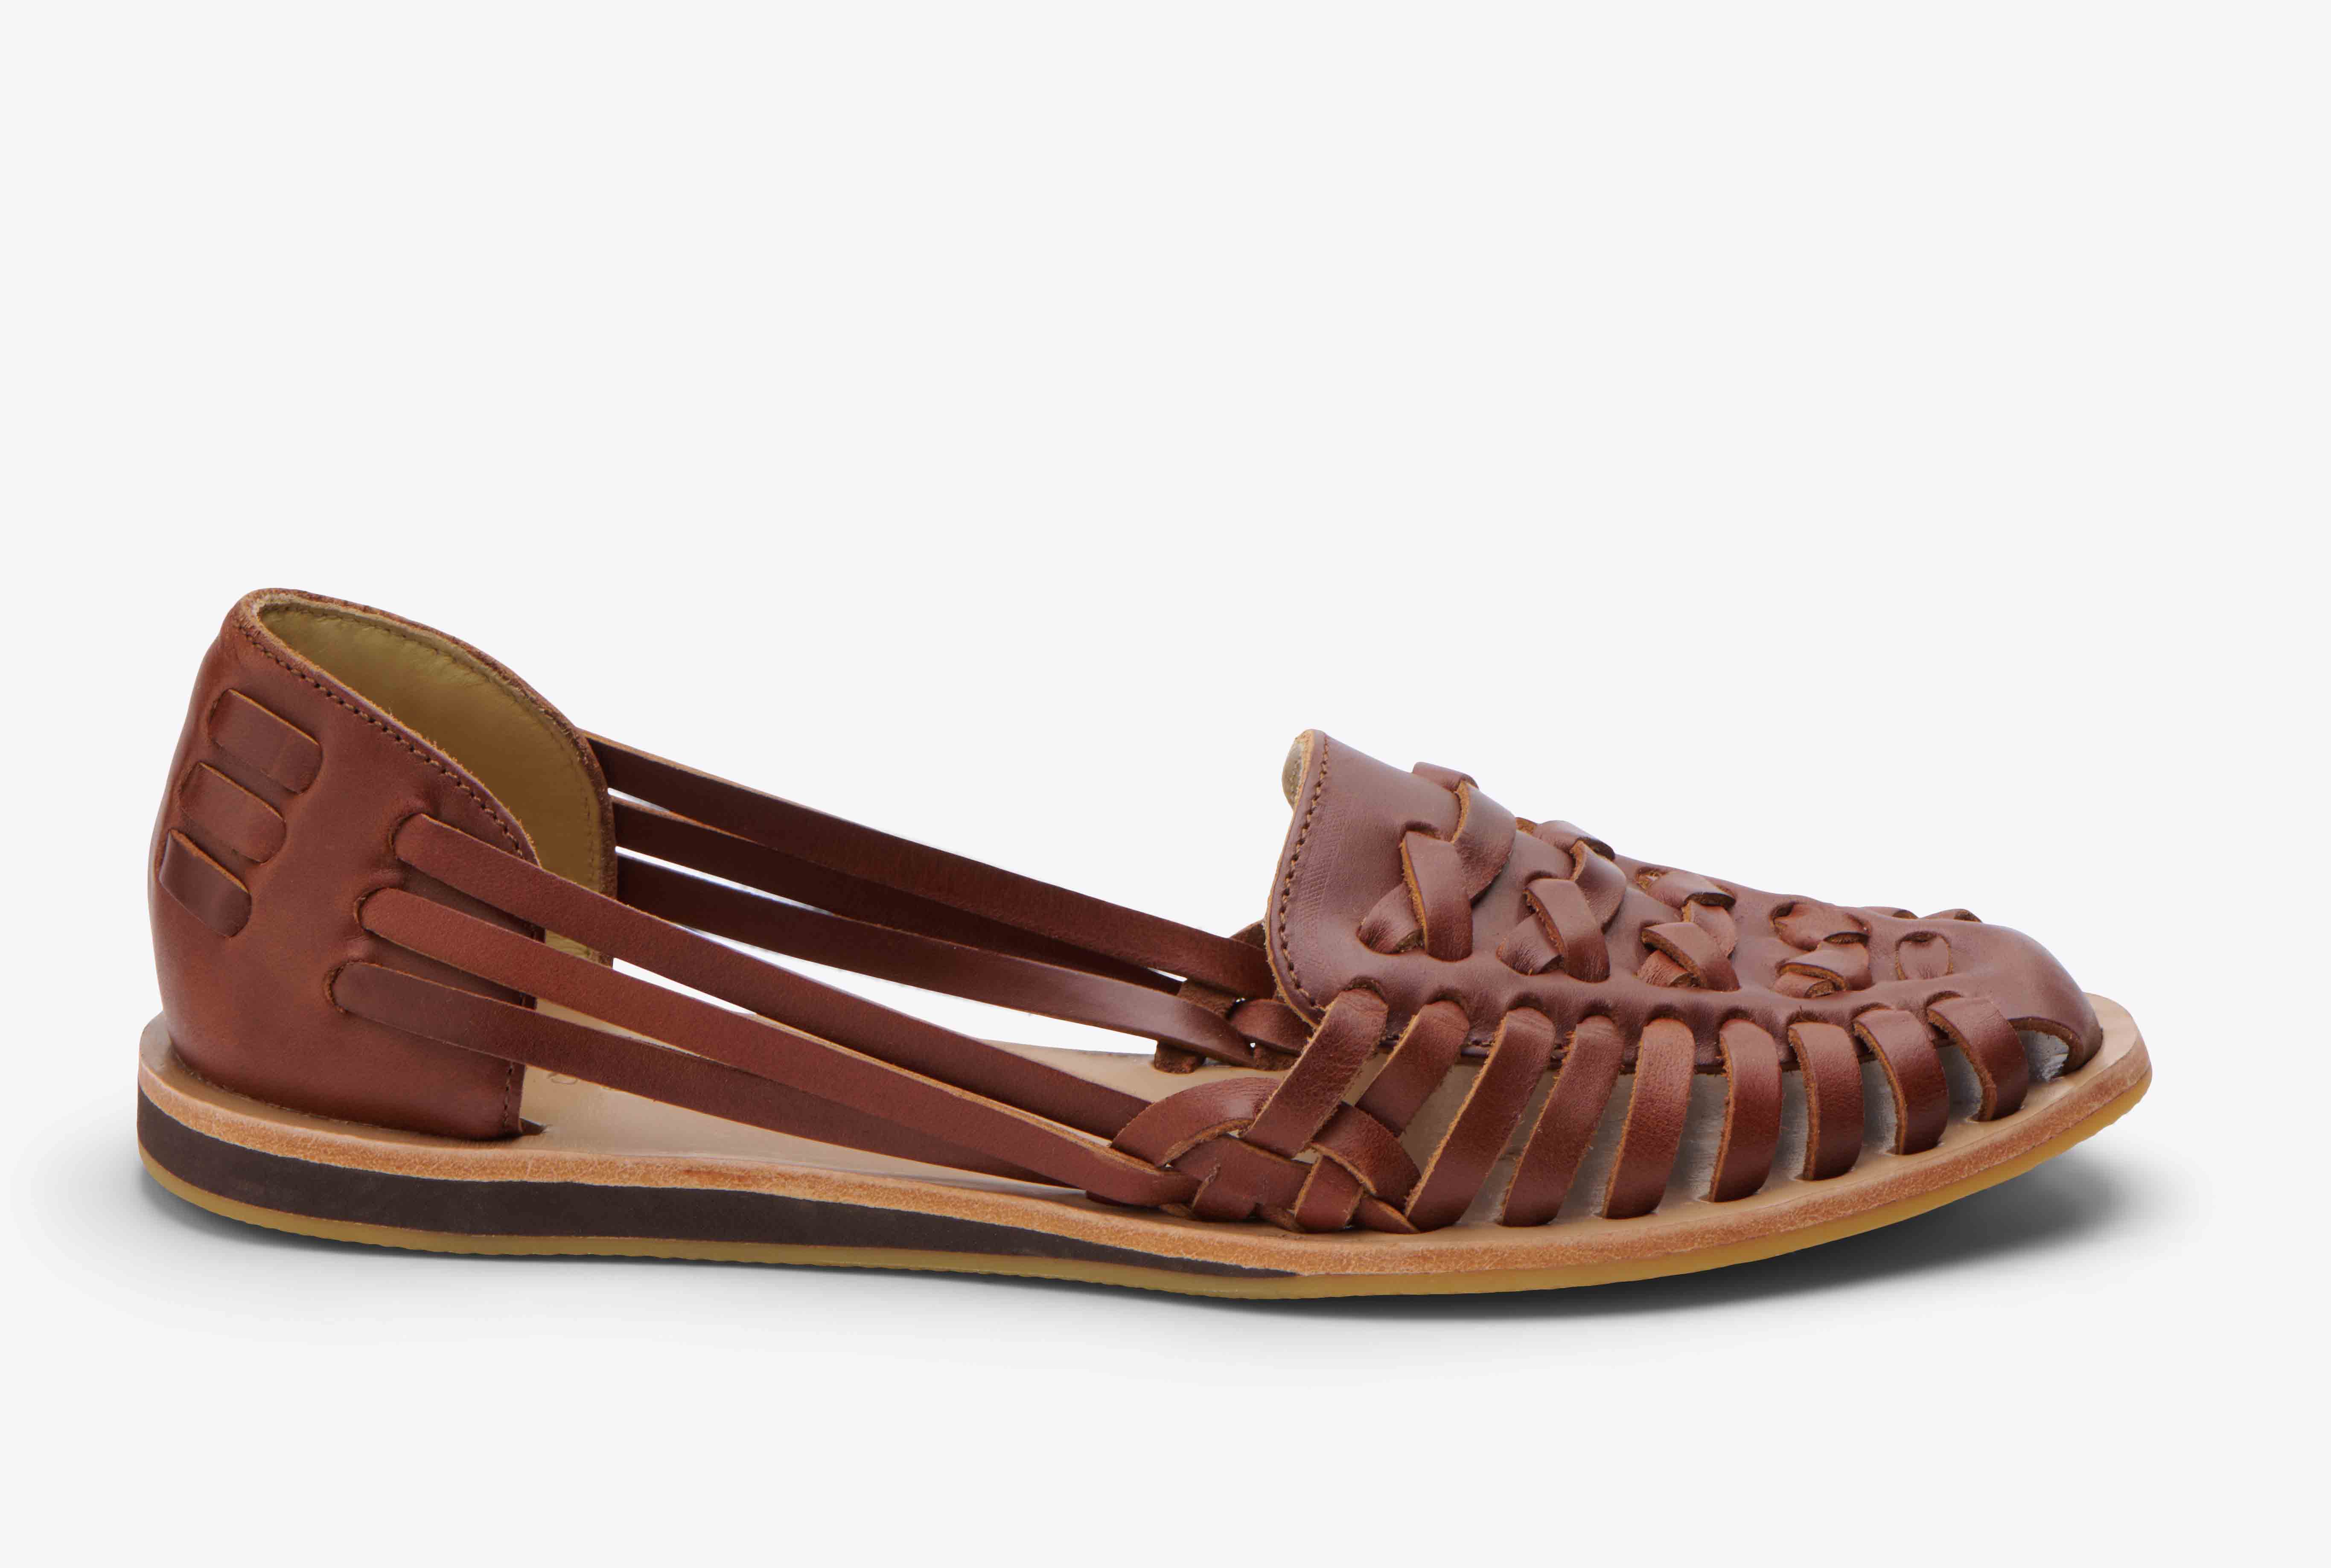 Nisolo Women's Huarache Sandal Brandy - Every Nisolo product is built on the foundation of comfort, function, and design. 